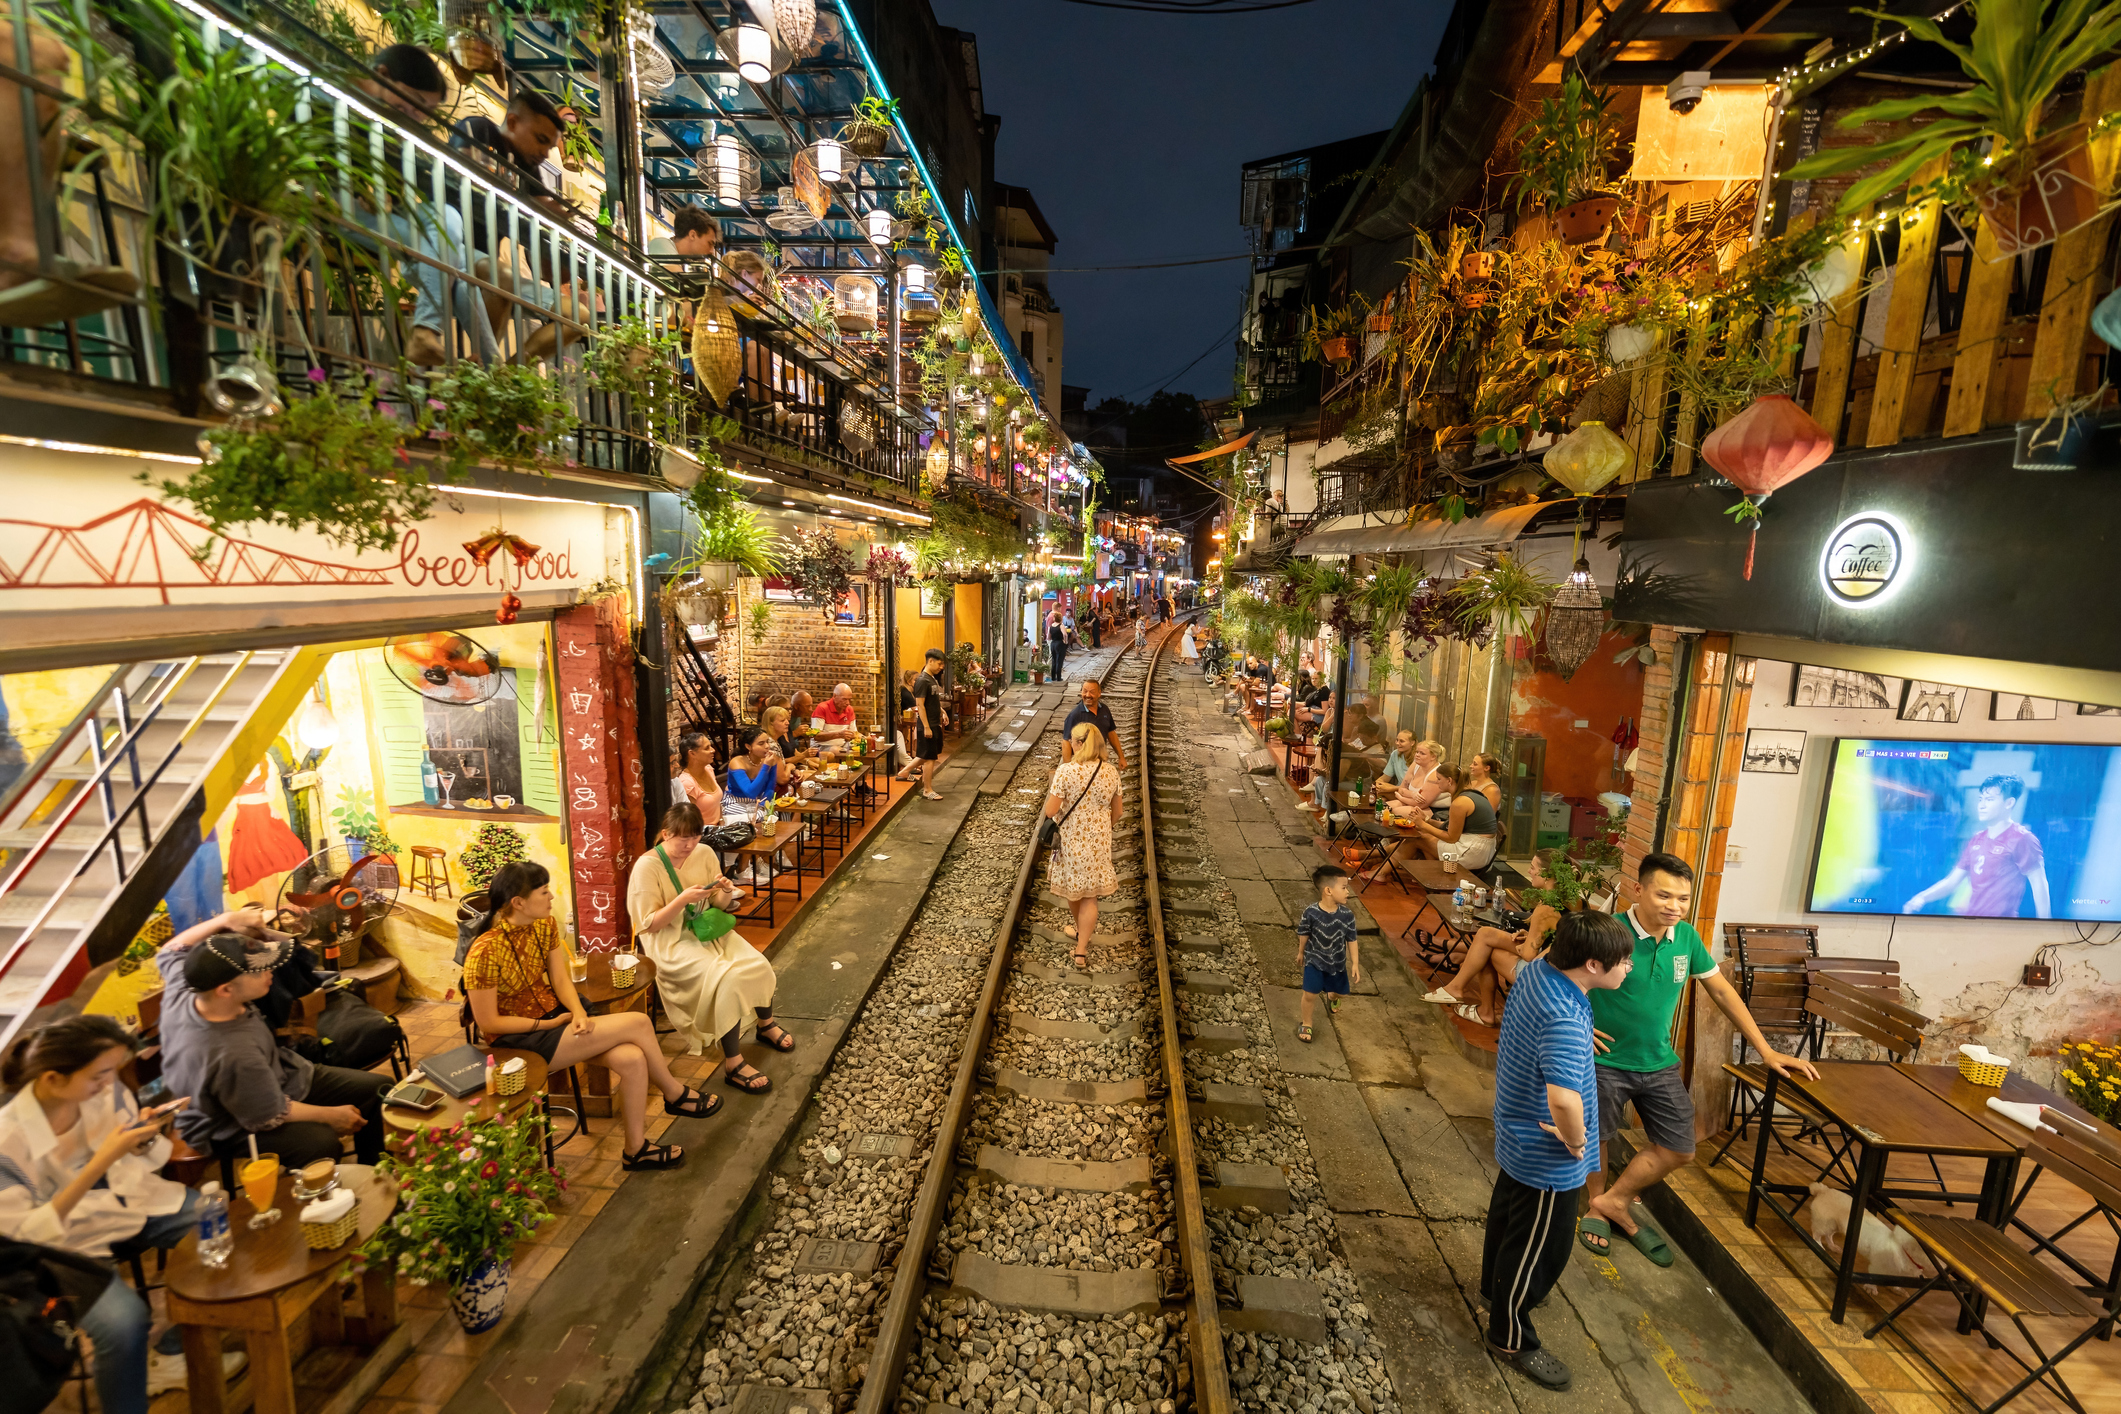 View of train passing through a narrow street of the Hanoi Old Quarter. Tourists taking pictures of hurtling train. The Hanoi Train Street is a popular attraction.